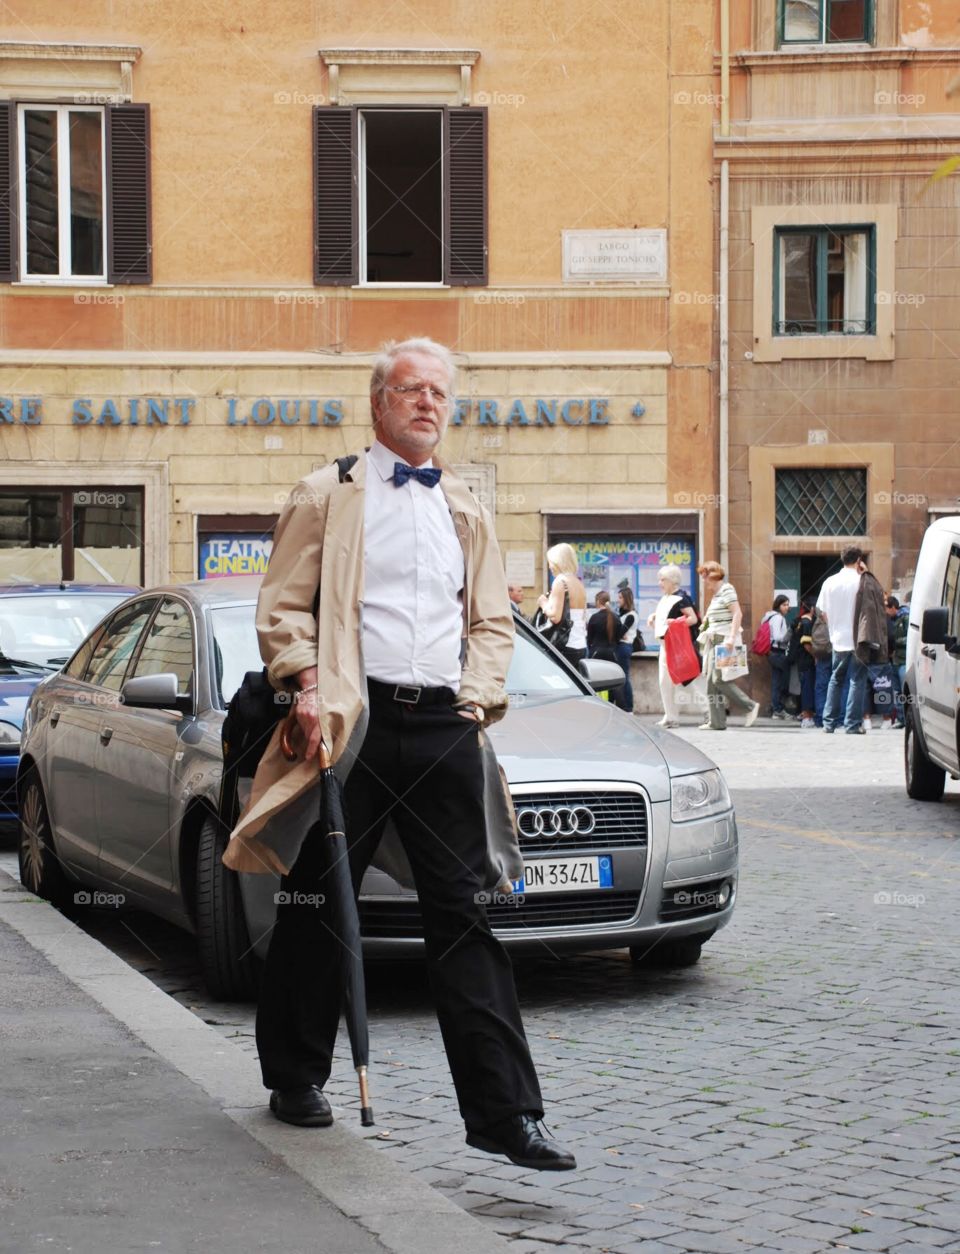 Jaunty Gent. A gentleman decked out in a bow tie and a classy walking stick walks in front of an Audi in Rome